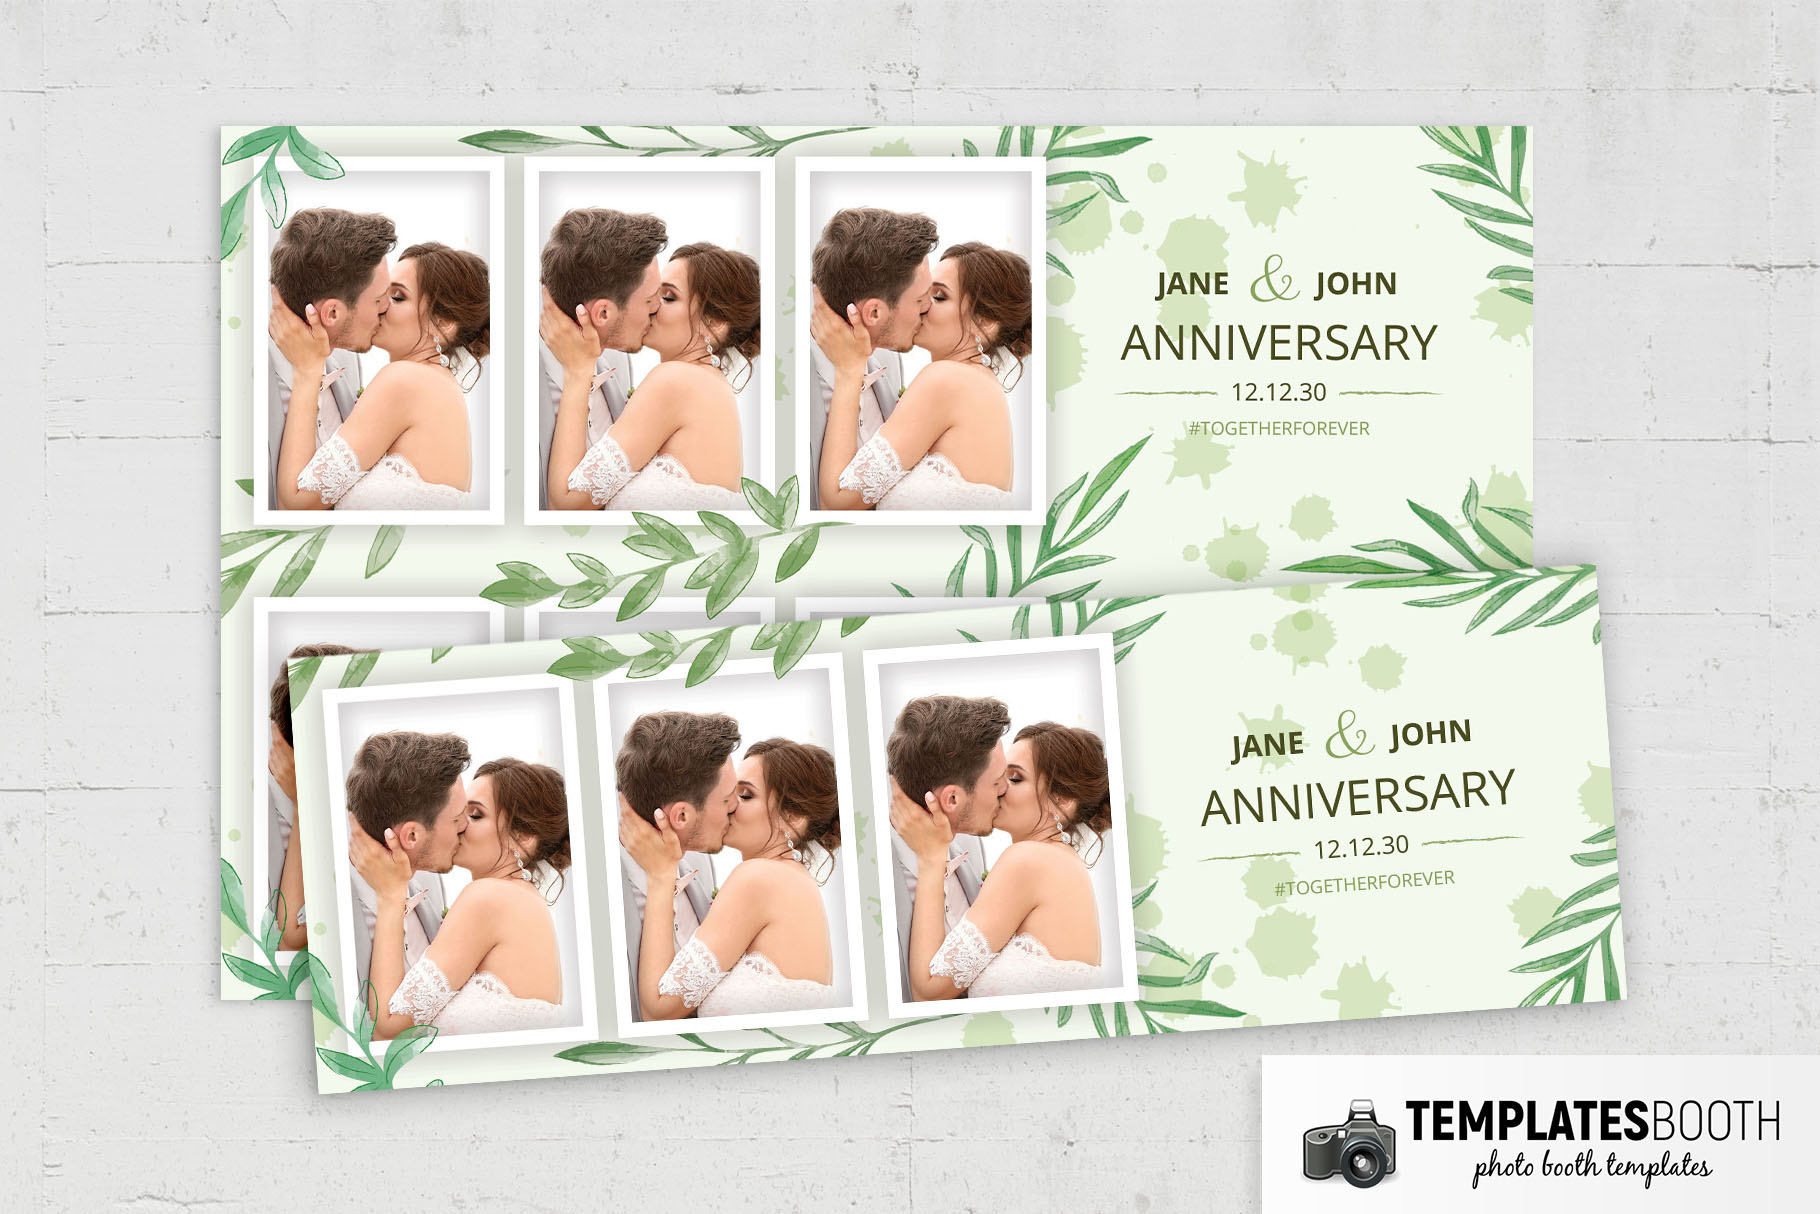 Free Anniversary Photo Booth Template